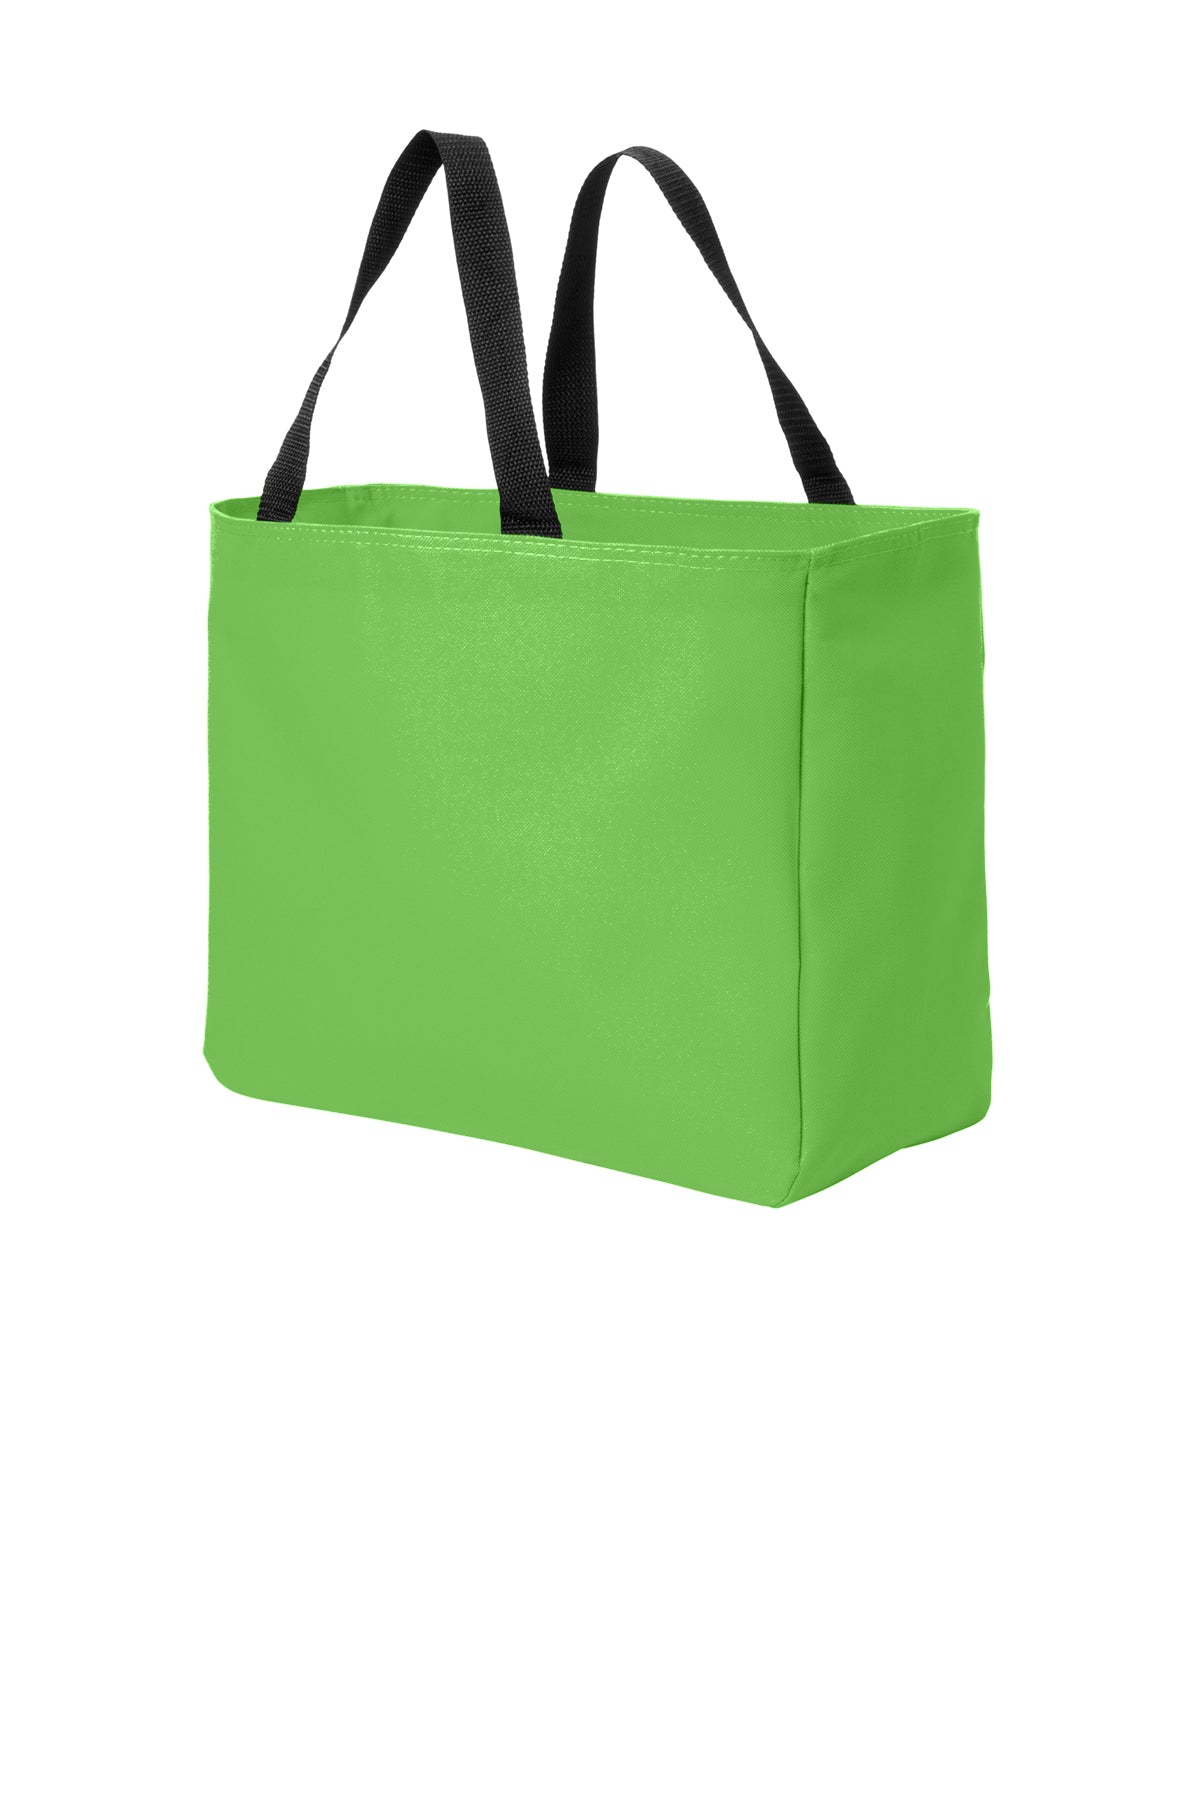 Port Authority - Essential Customized Tote, Bright Lime